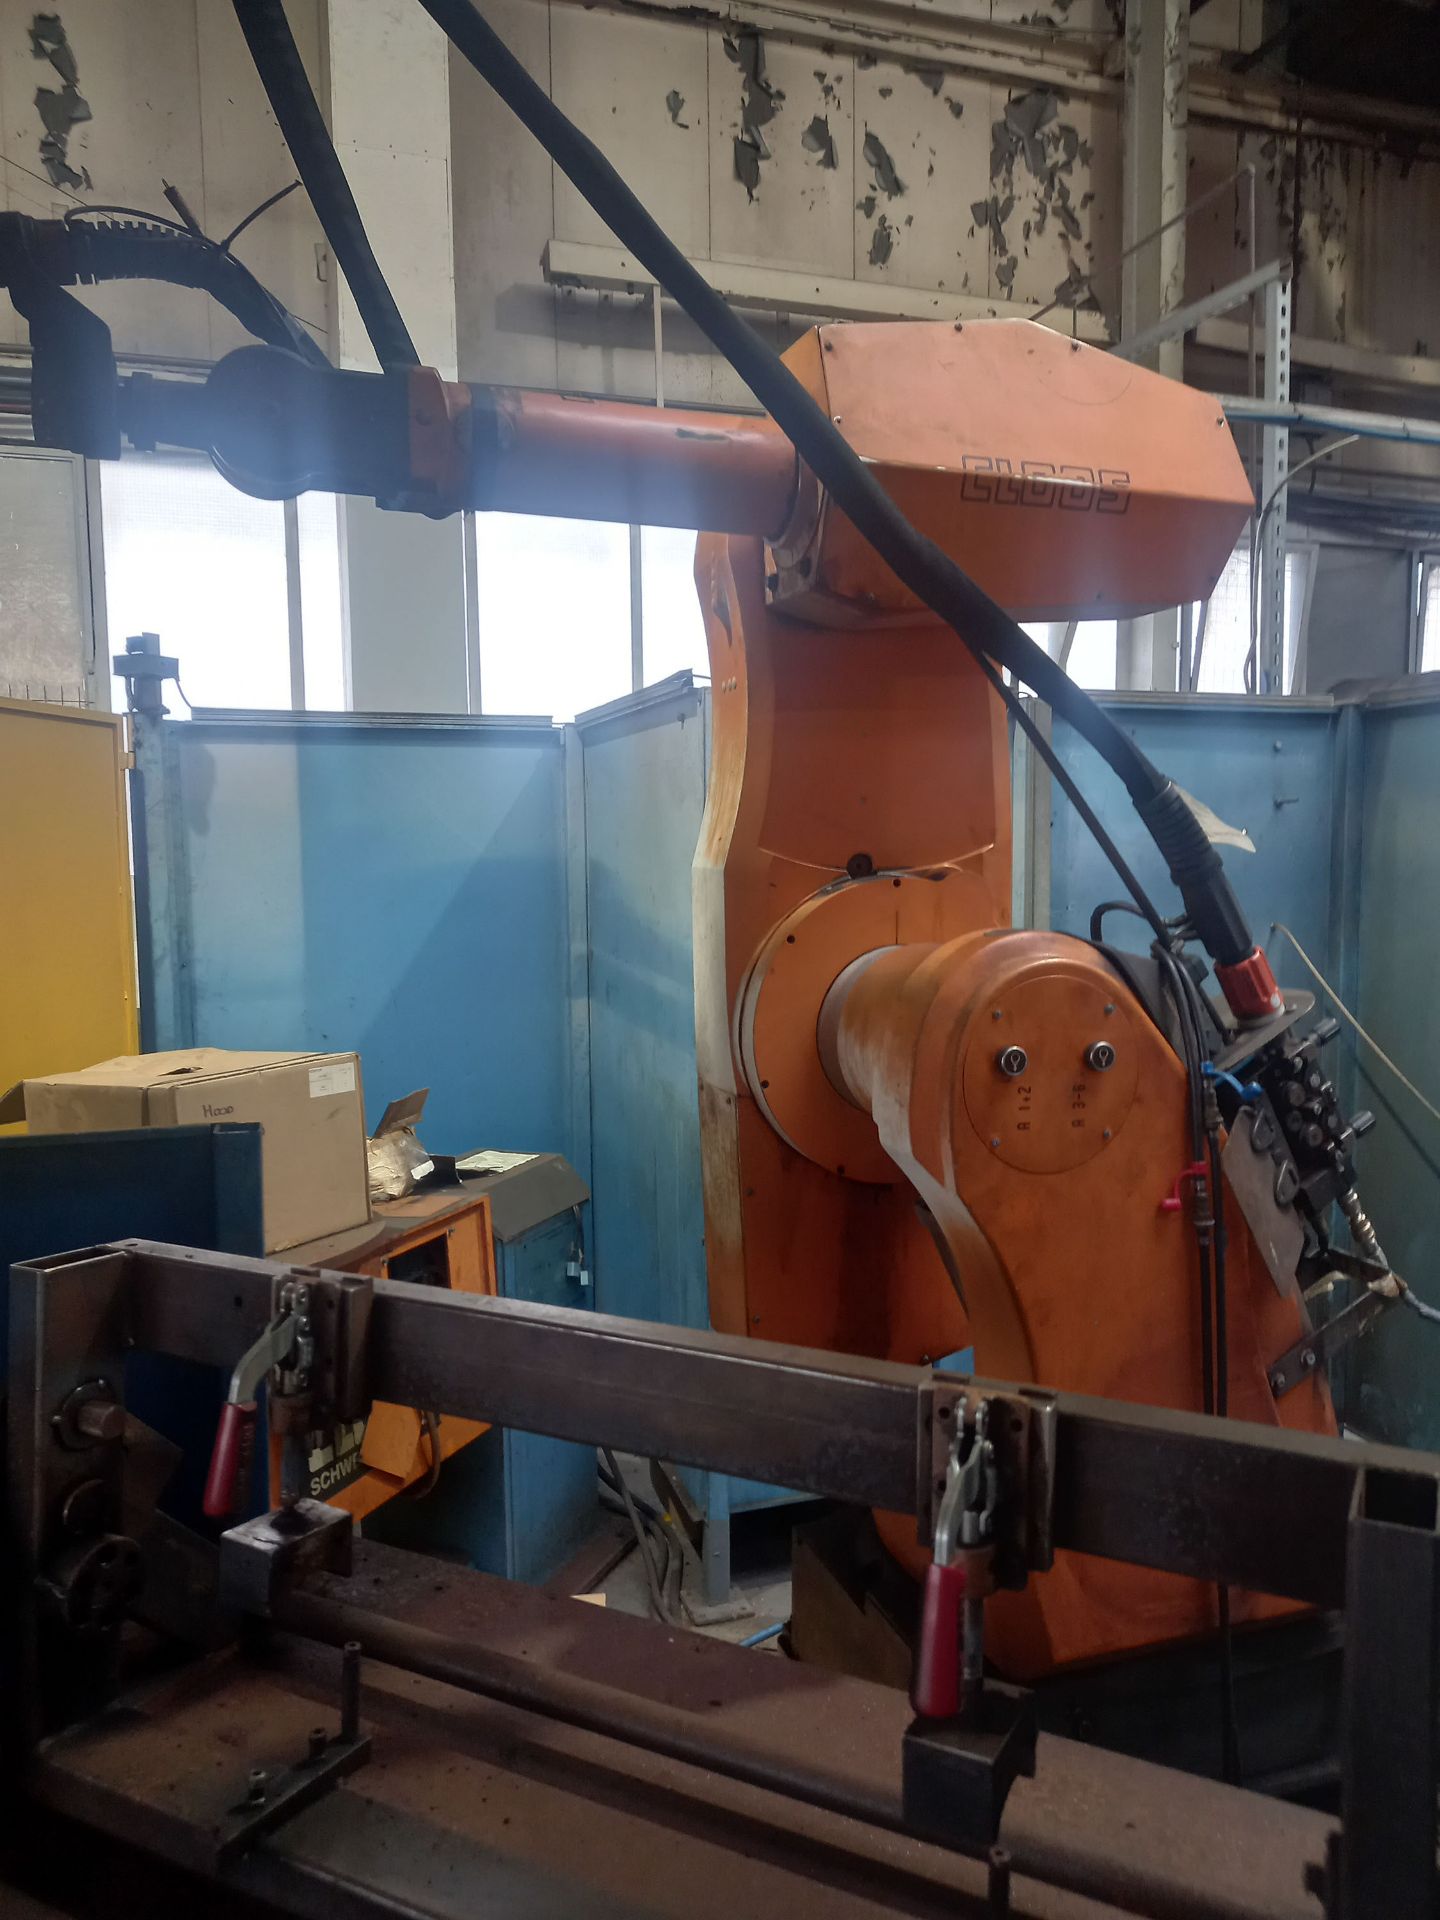 Cloos ROMAT 310 Two Position Robotic Welding Cell Serial No: 3327.882T03 (2000) with Cloos Welding R - Bild 2 aus 4